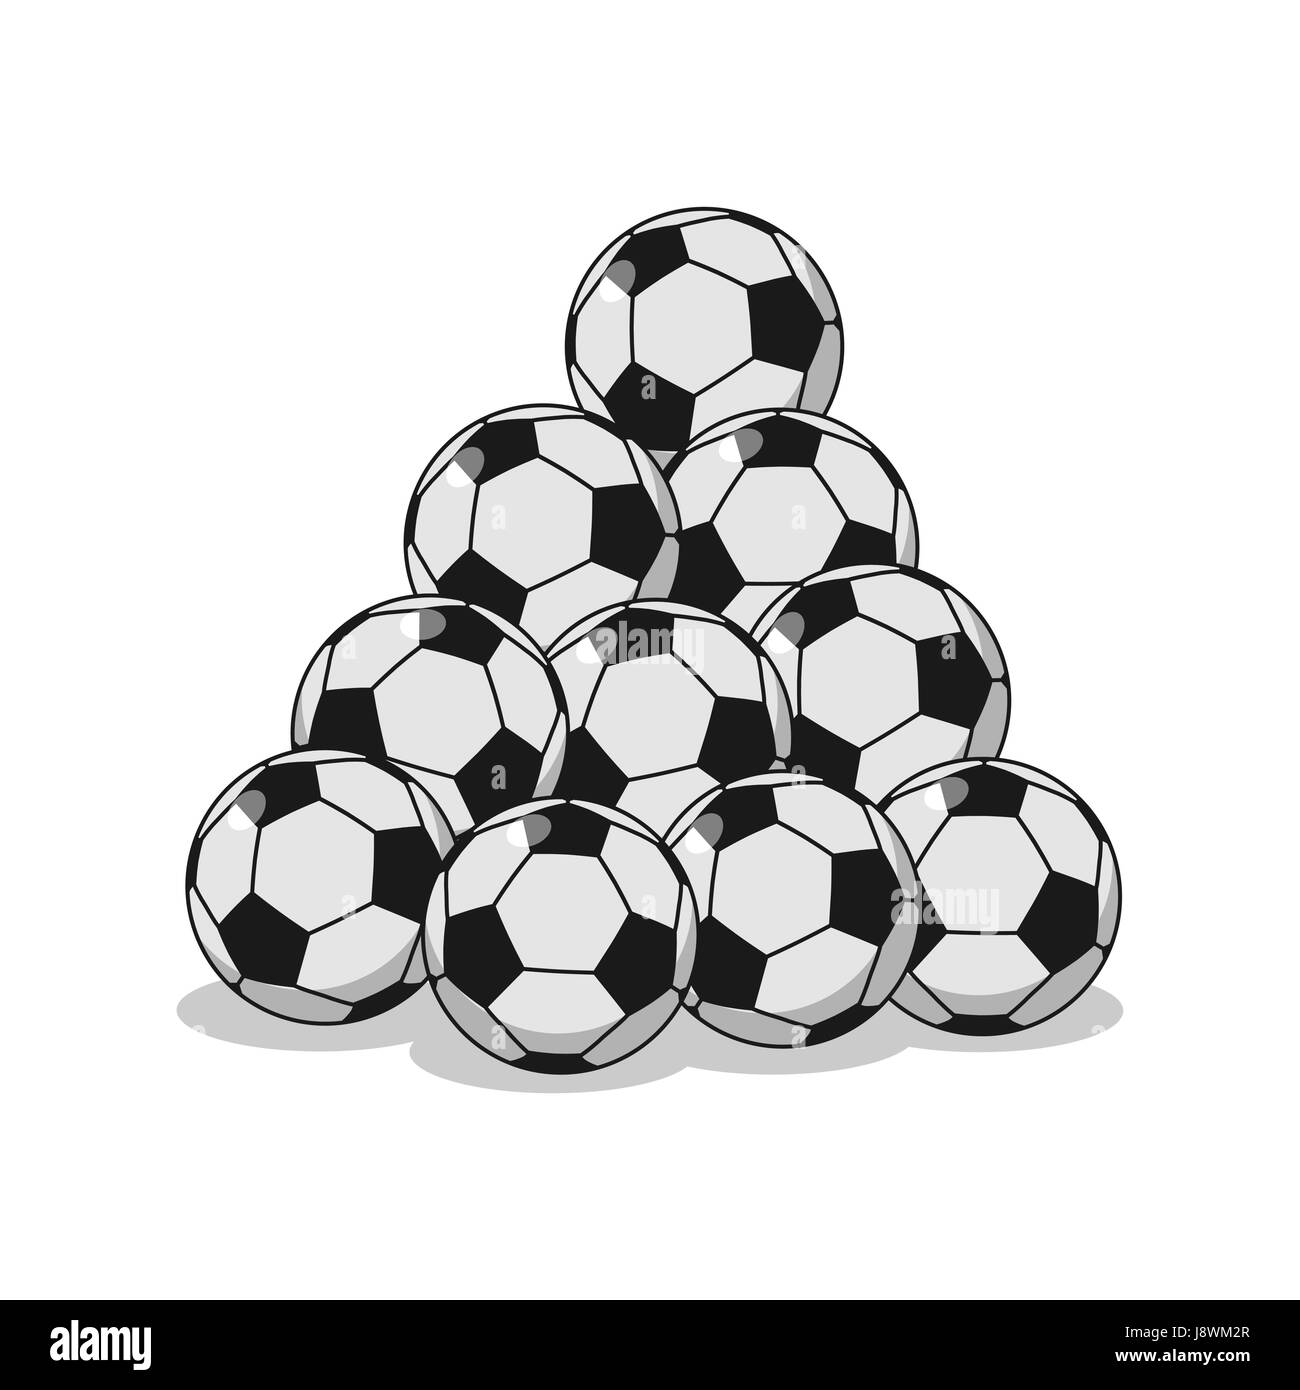 Pile of football. Many soccer balls. Sports accessory Stock Vector